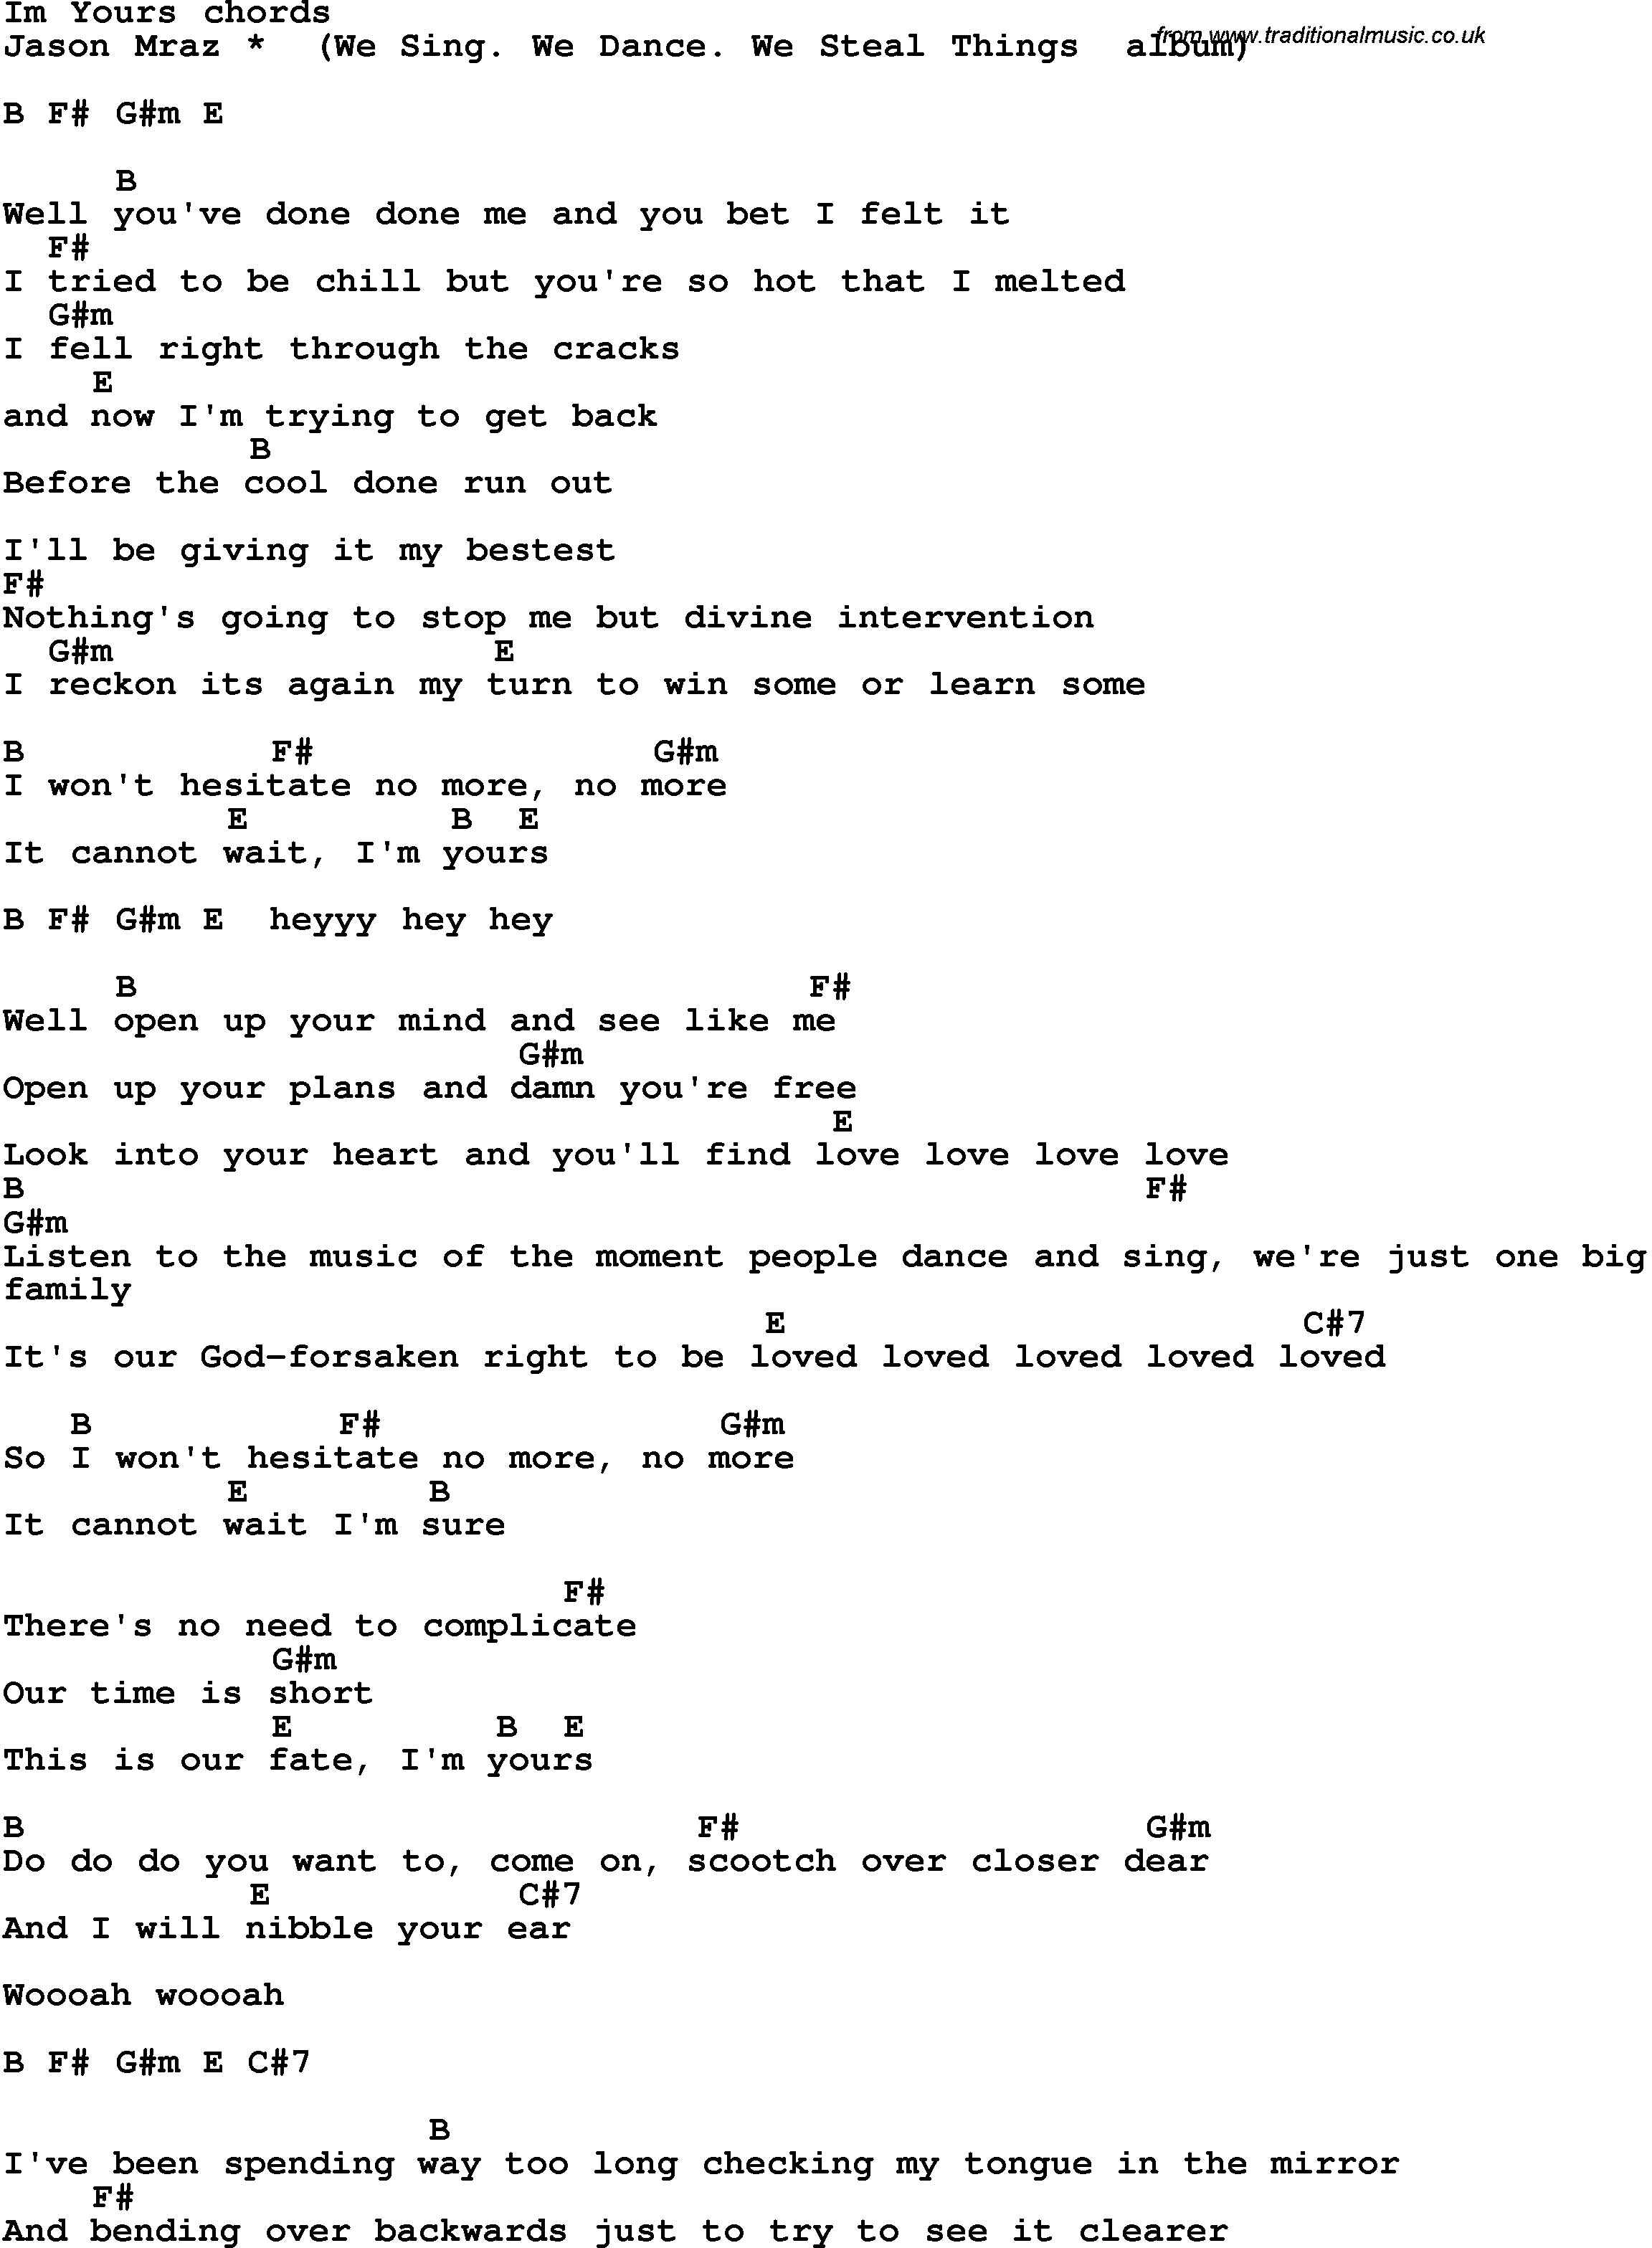 Song Lyrics with guitar chords for I'm Yours